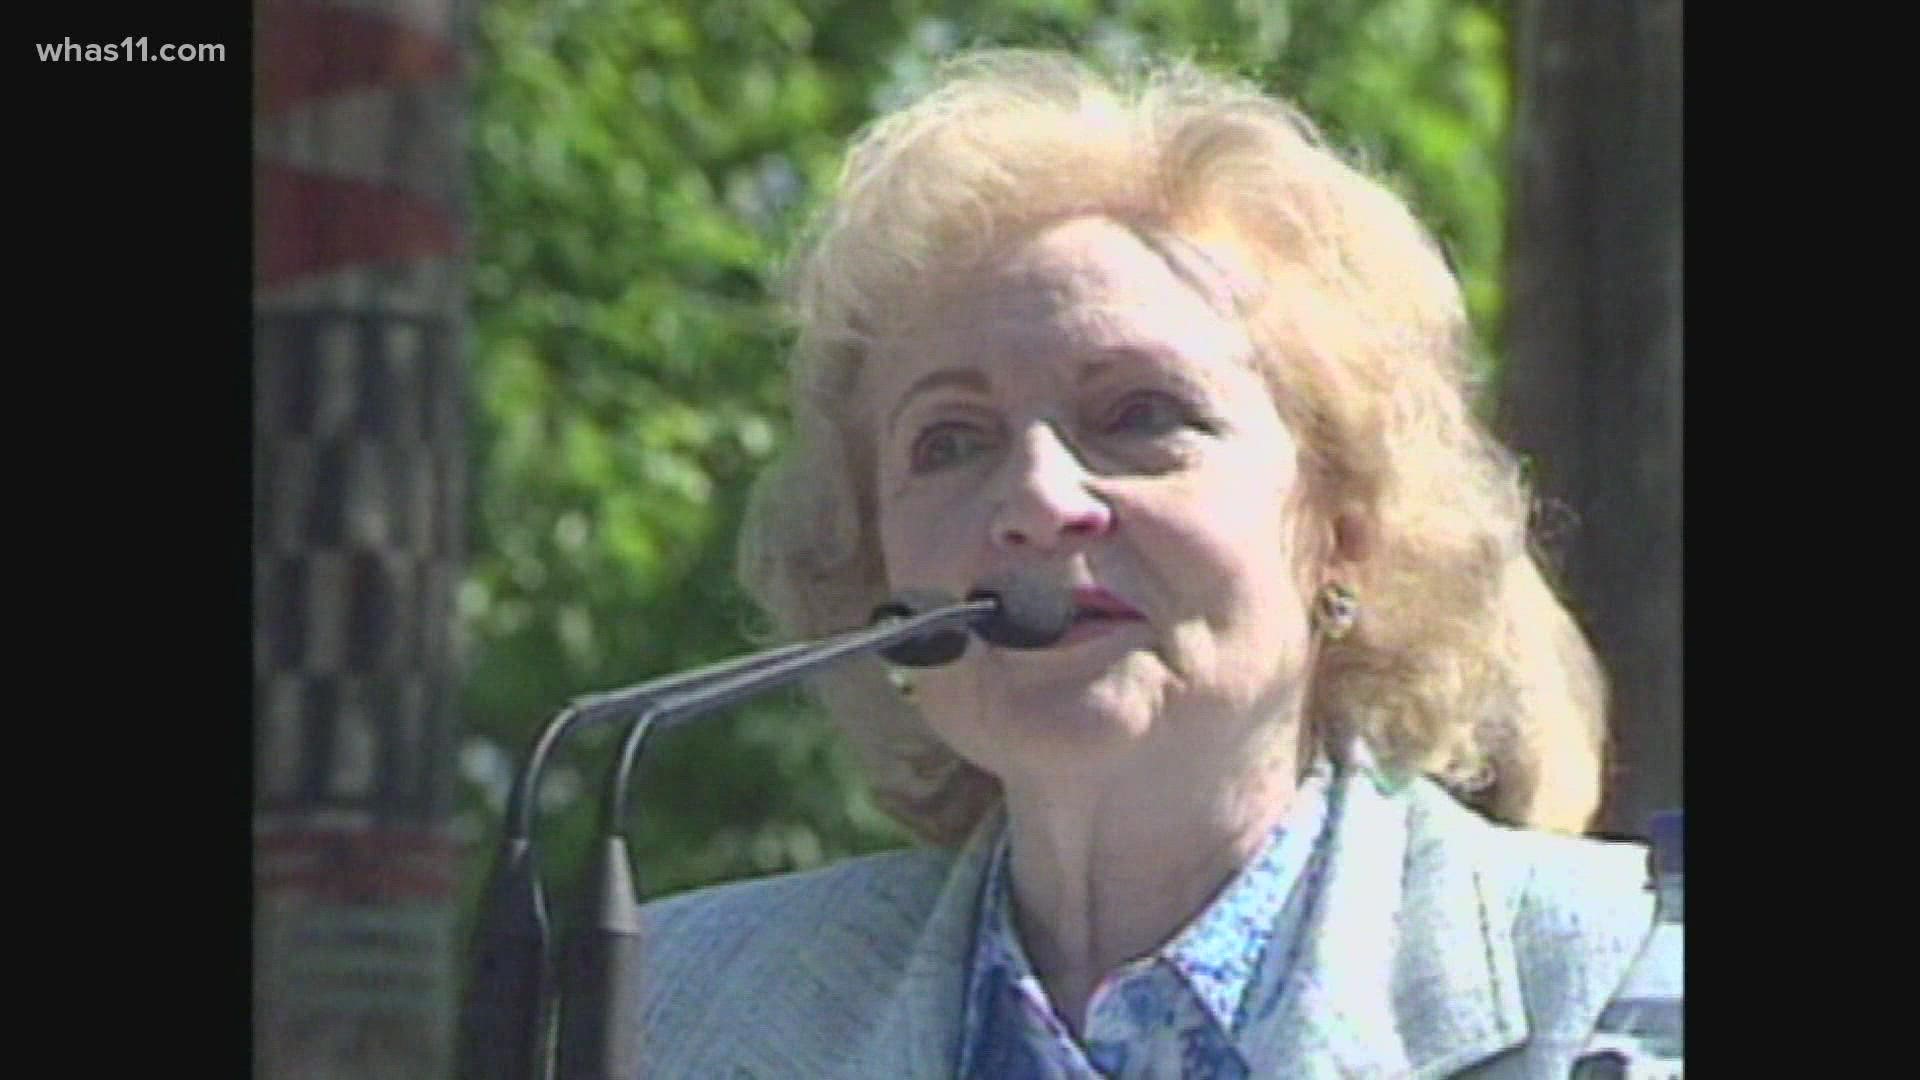 TV's "Golden Girl" visited Louisville twice, taking part of the grand openings of exhibits at the Zoo. Betty White passed away, 18 days before her 100 birthday.